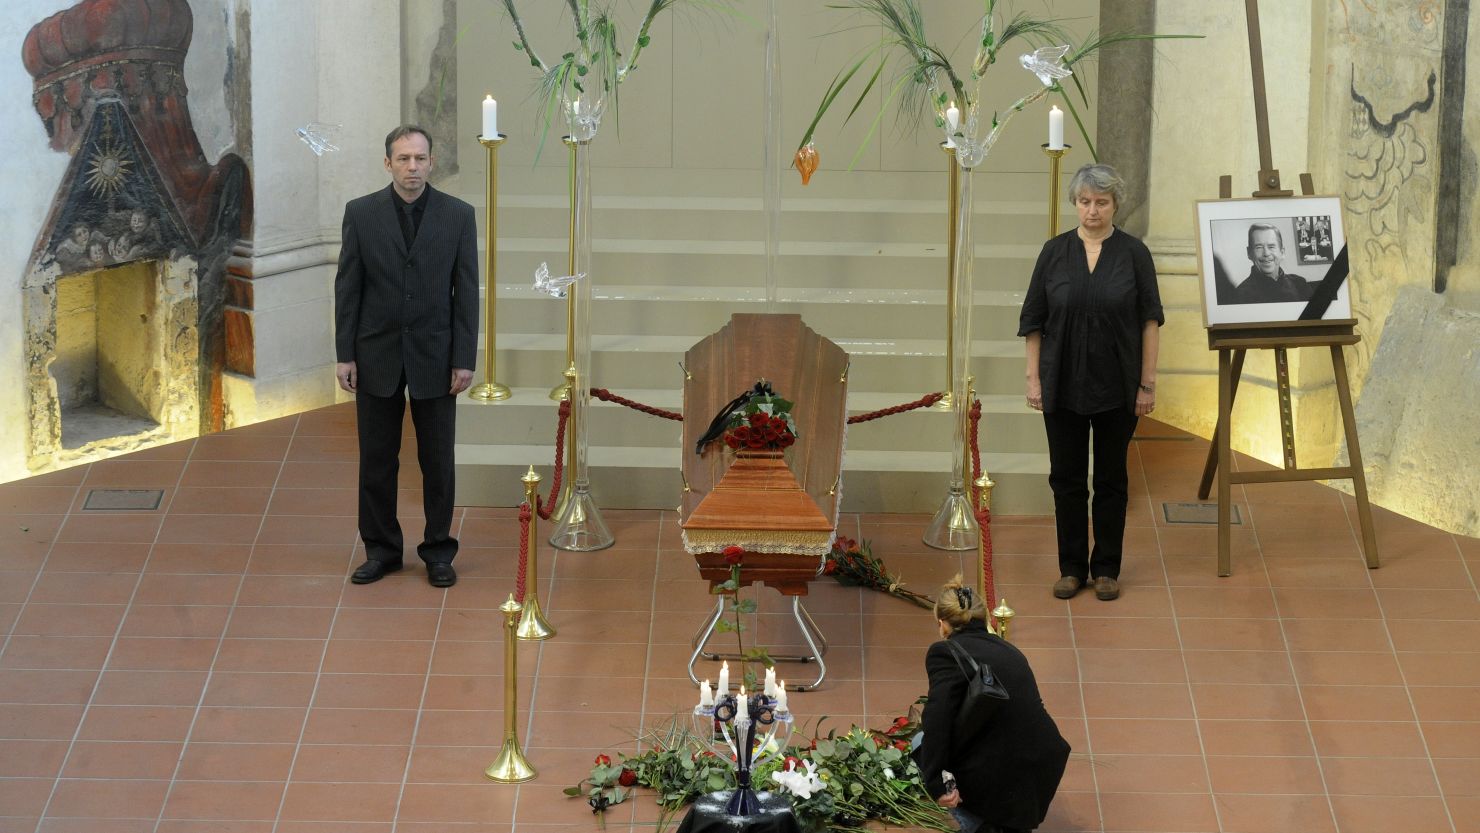 Vaclav Havel's coffin went on display Monday in St. Anna's Church, central Prague.